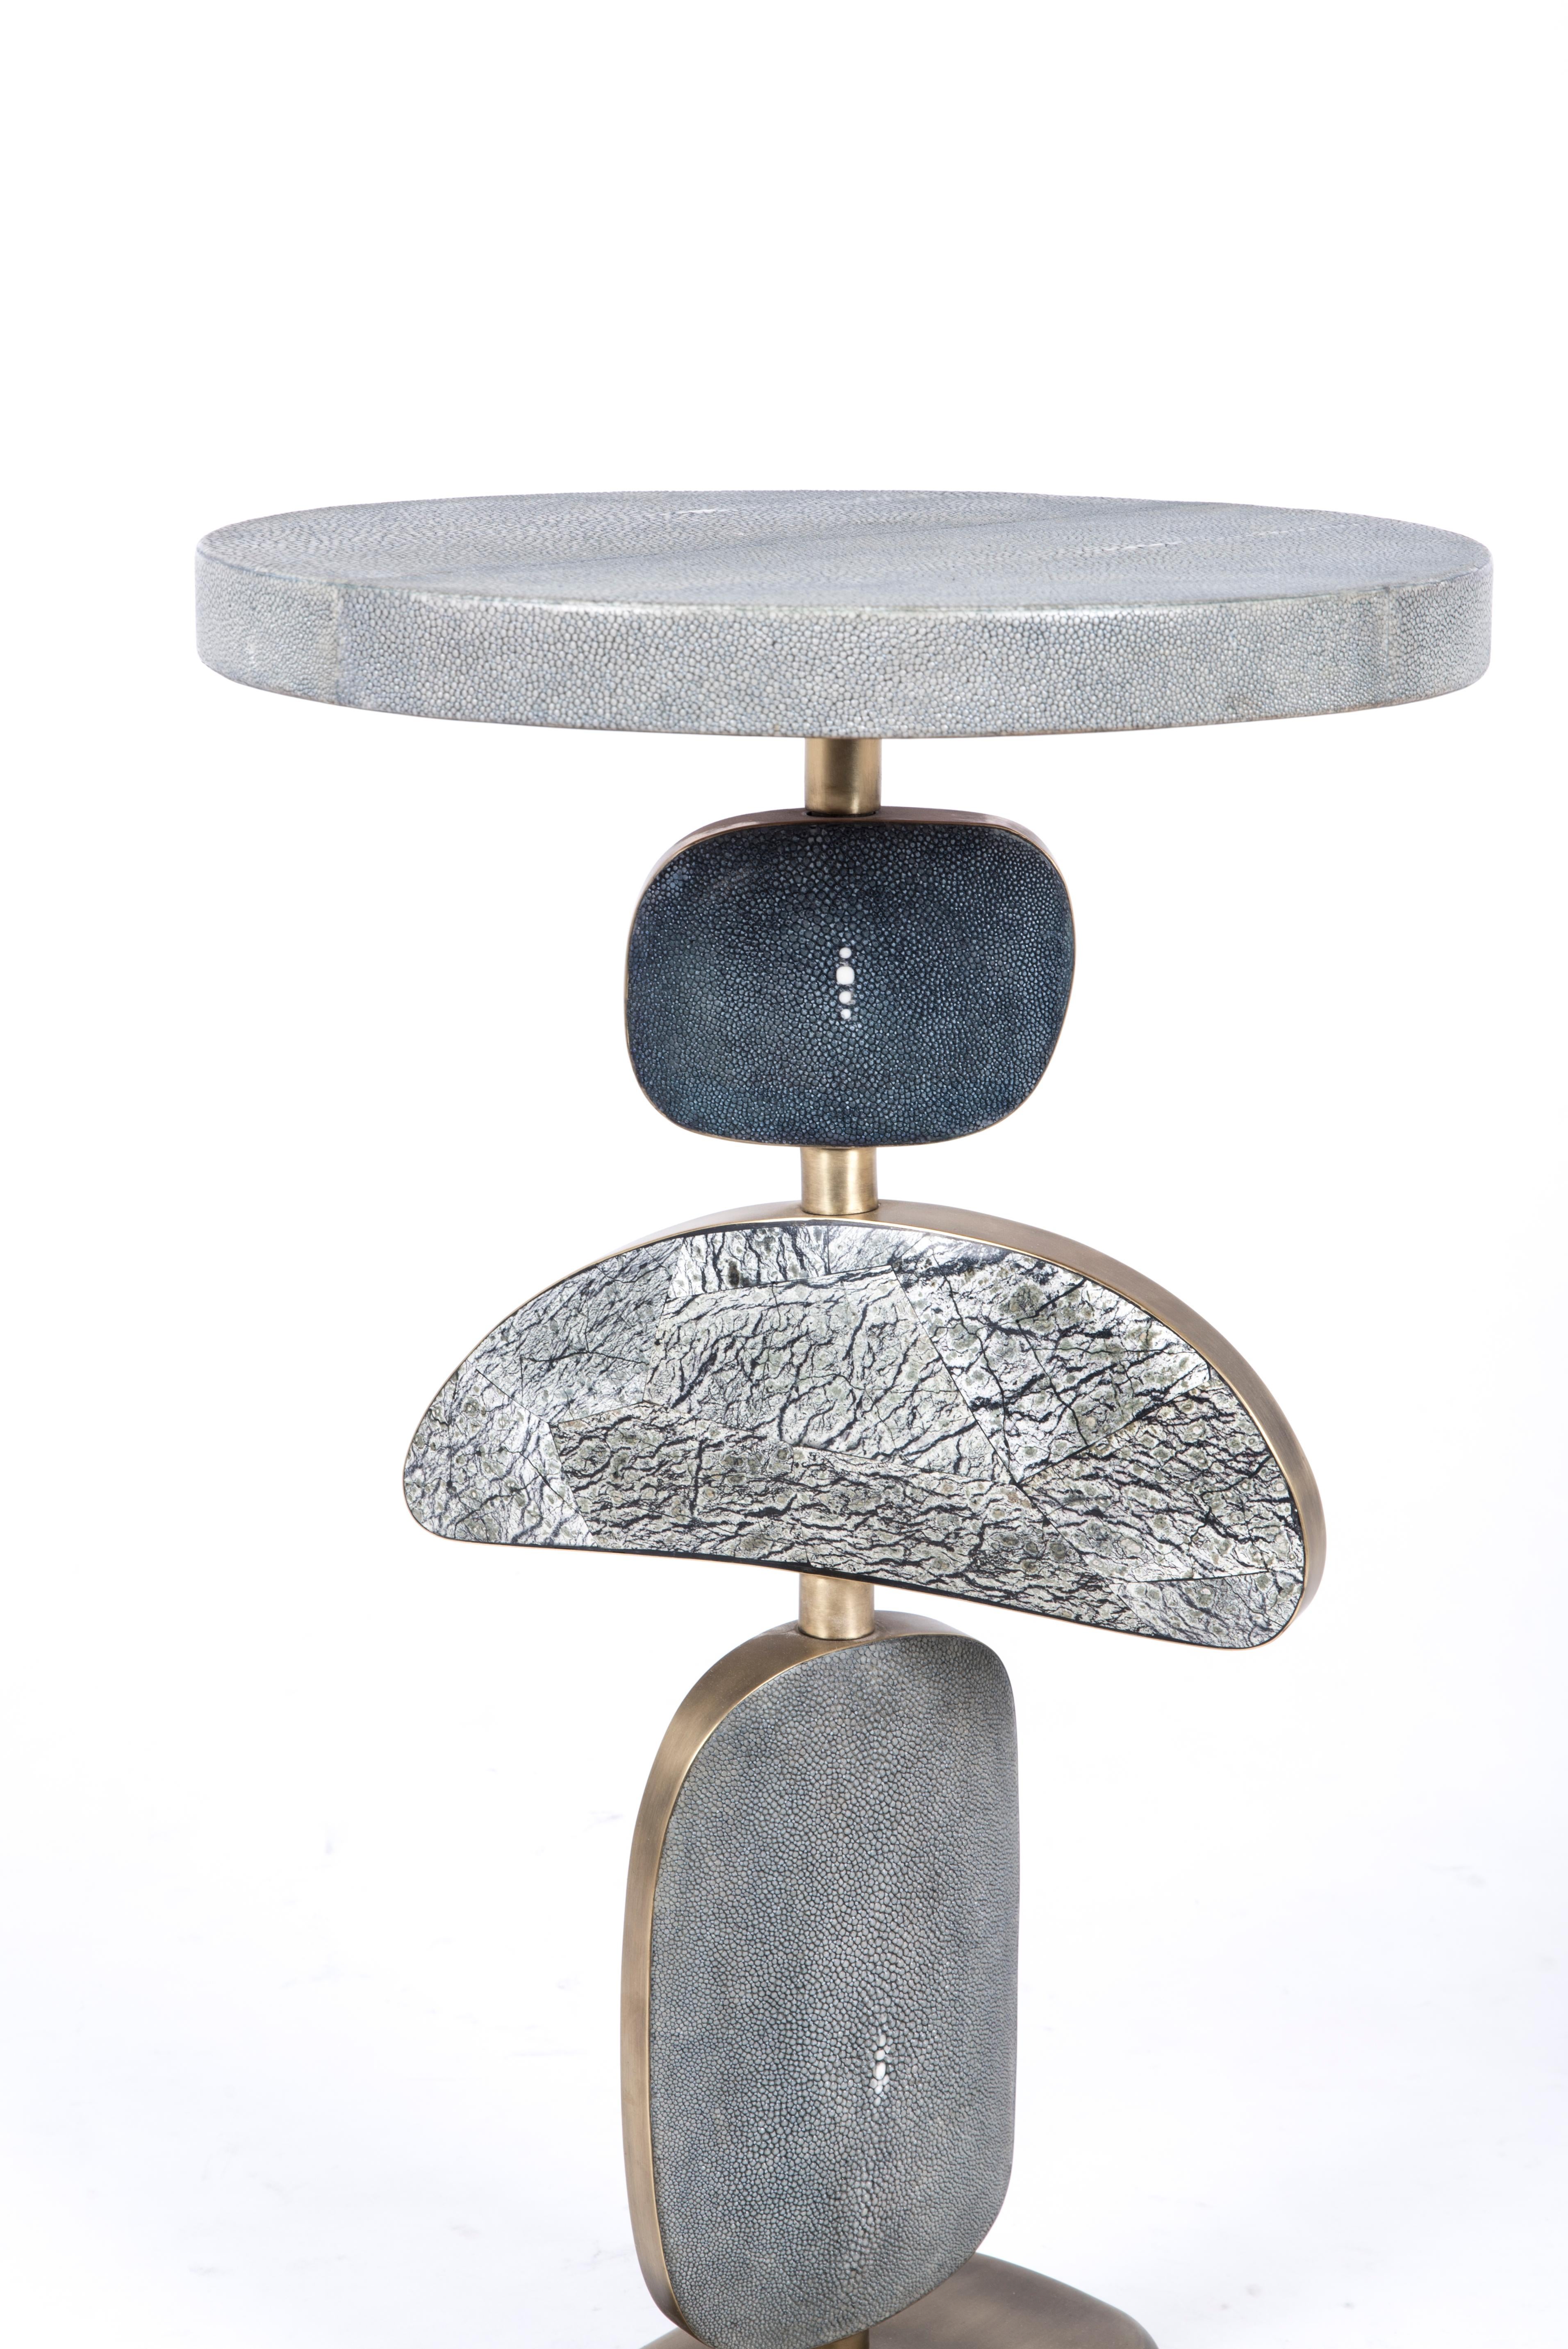 Shagreen Stingray Cosmo Side Table in Shagreen, Lemurian & Bronze-Patina Brass by Kifu, Paris For Sale